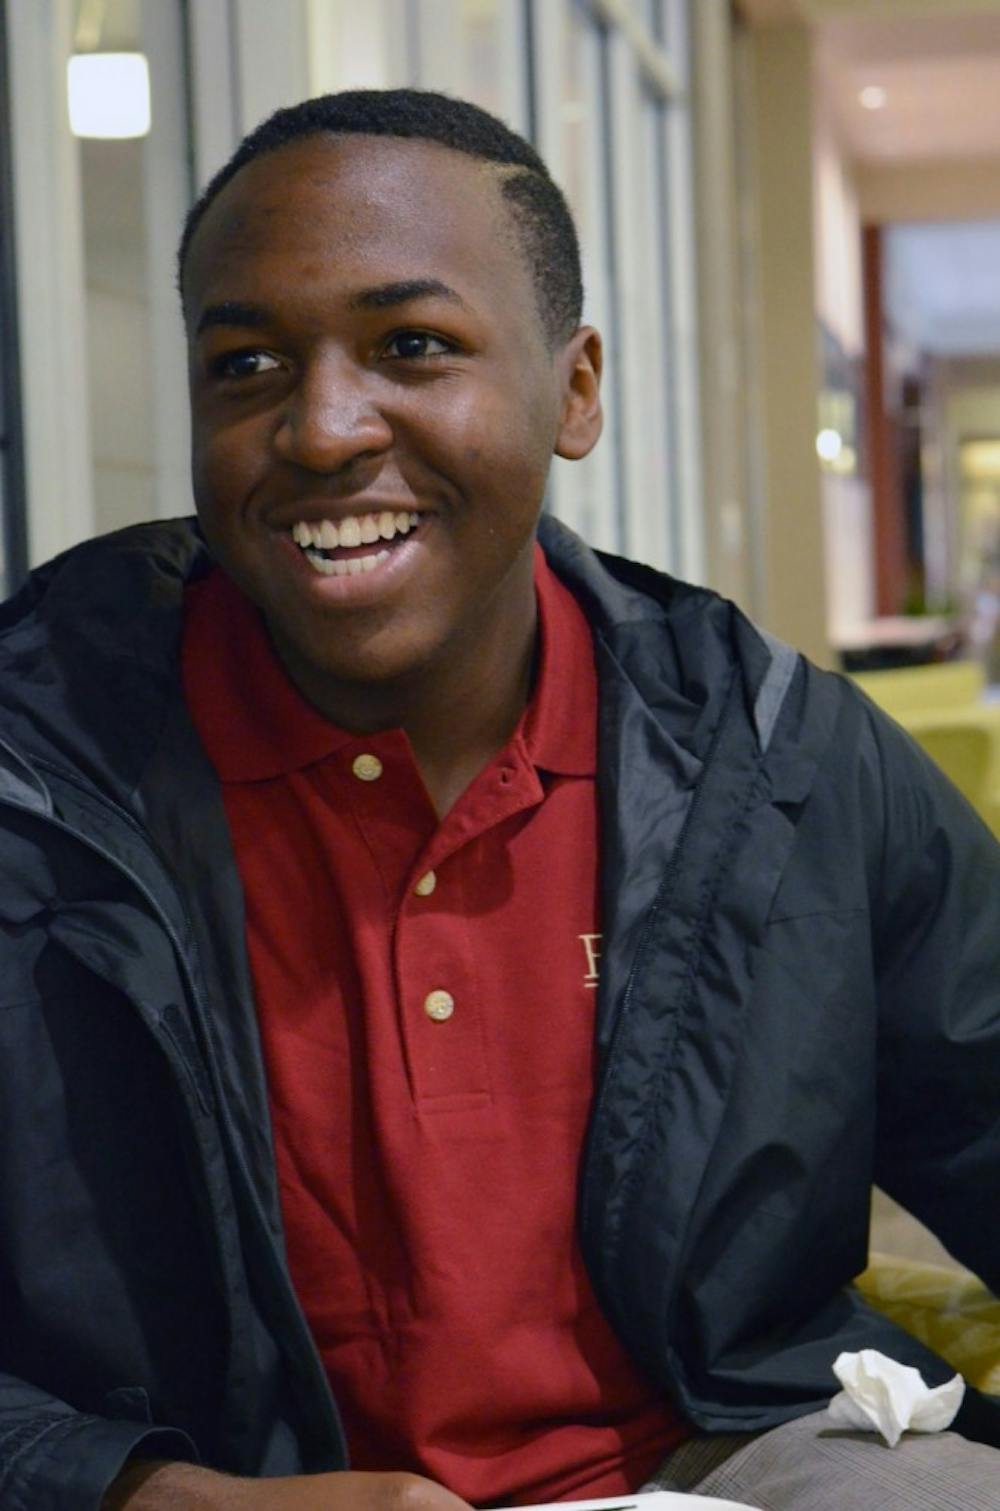 TRUE LIFE: Sophomore starring in MTV's title show - Elon News Network